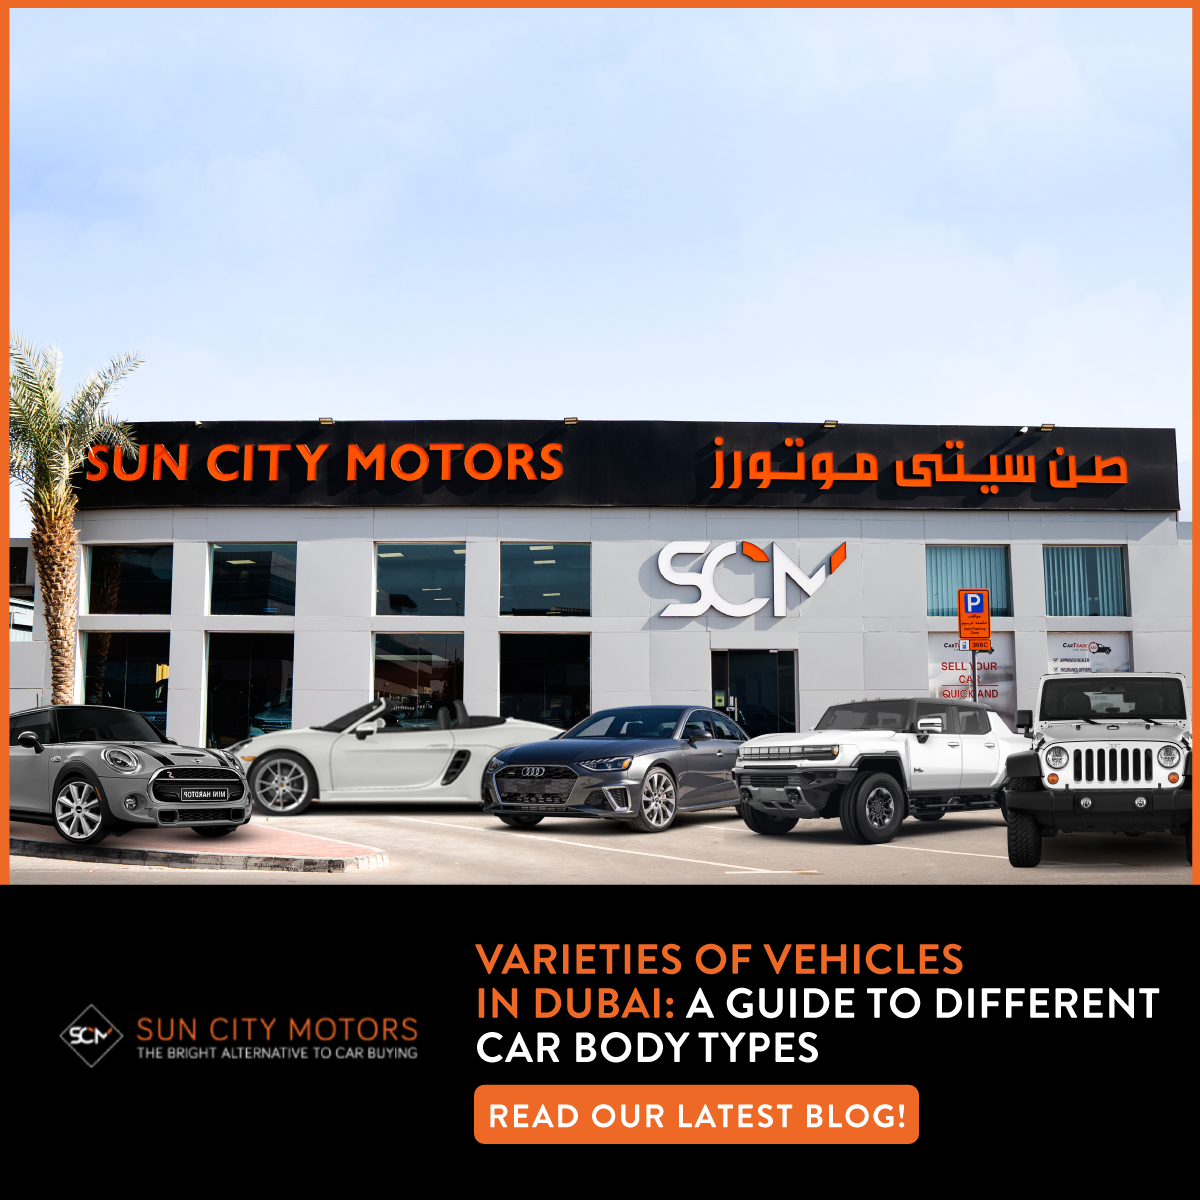 Varieties of Vehicles in Dubai: A Guide to Different Car Body Types